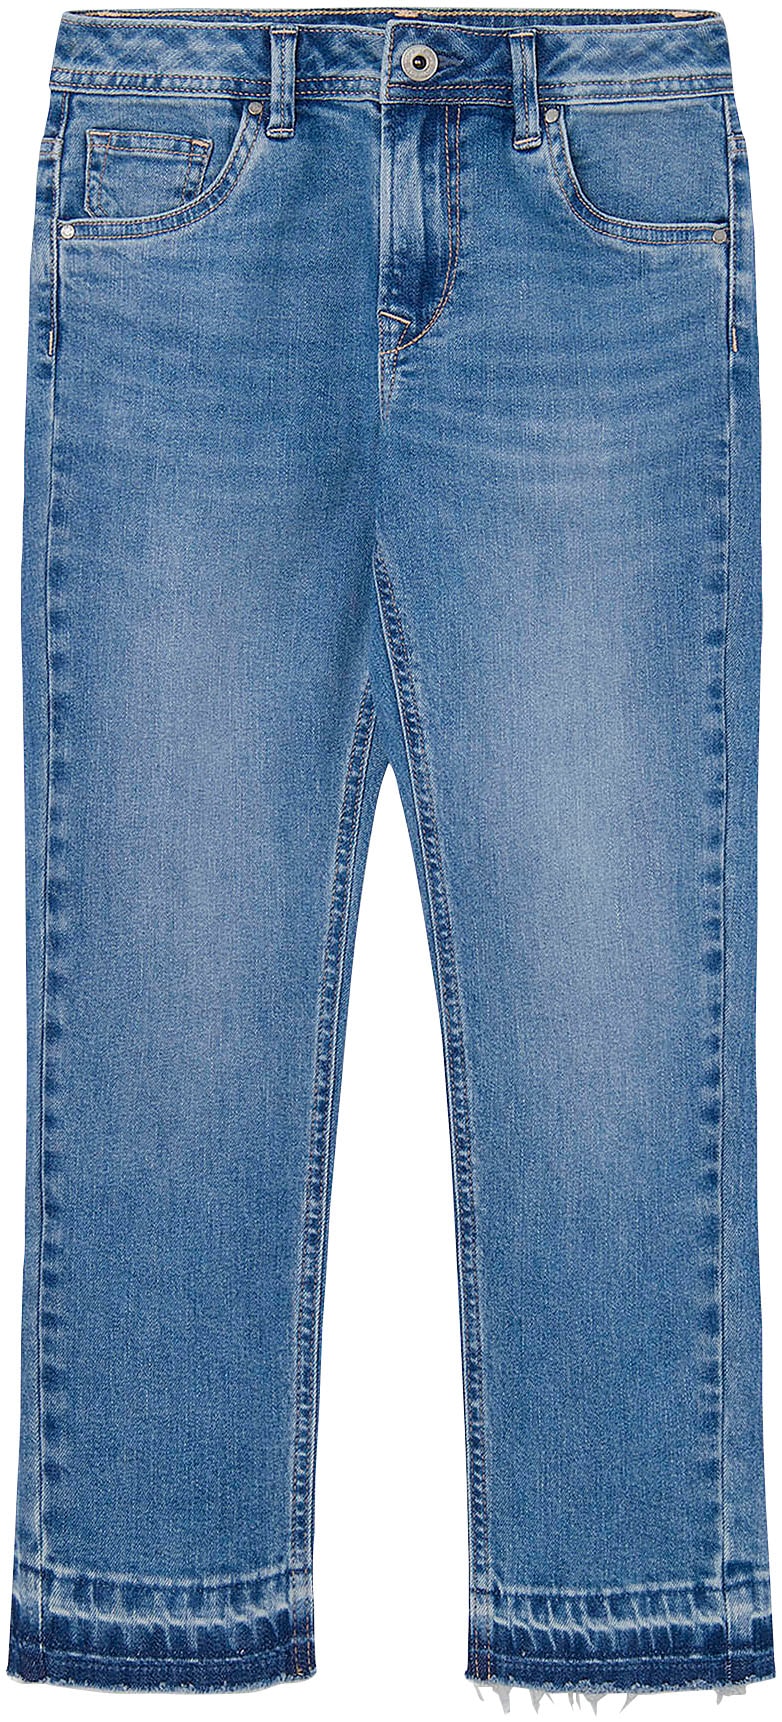 Pepe Jeans 5-Pocket-Jeans »TAPERED HWJR« von Pepe Jeans